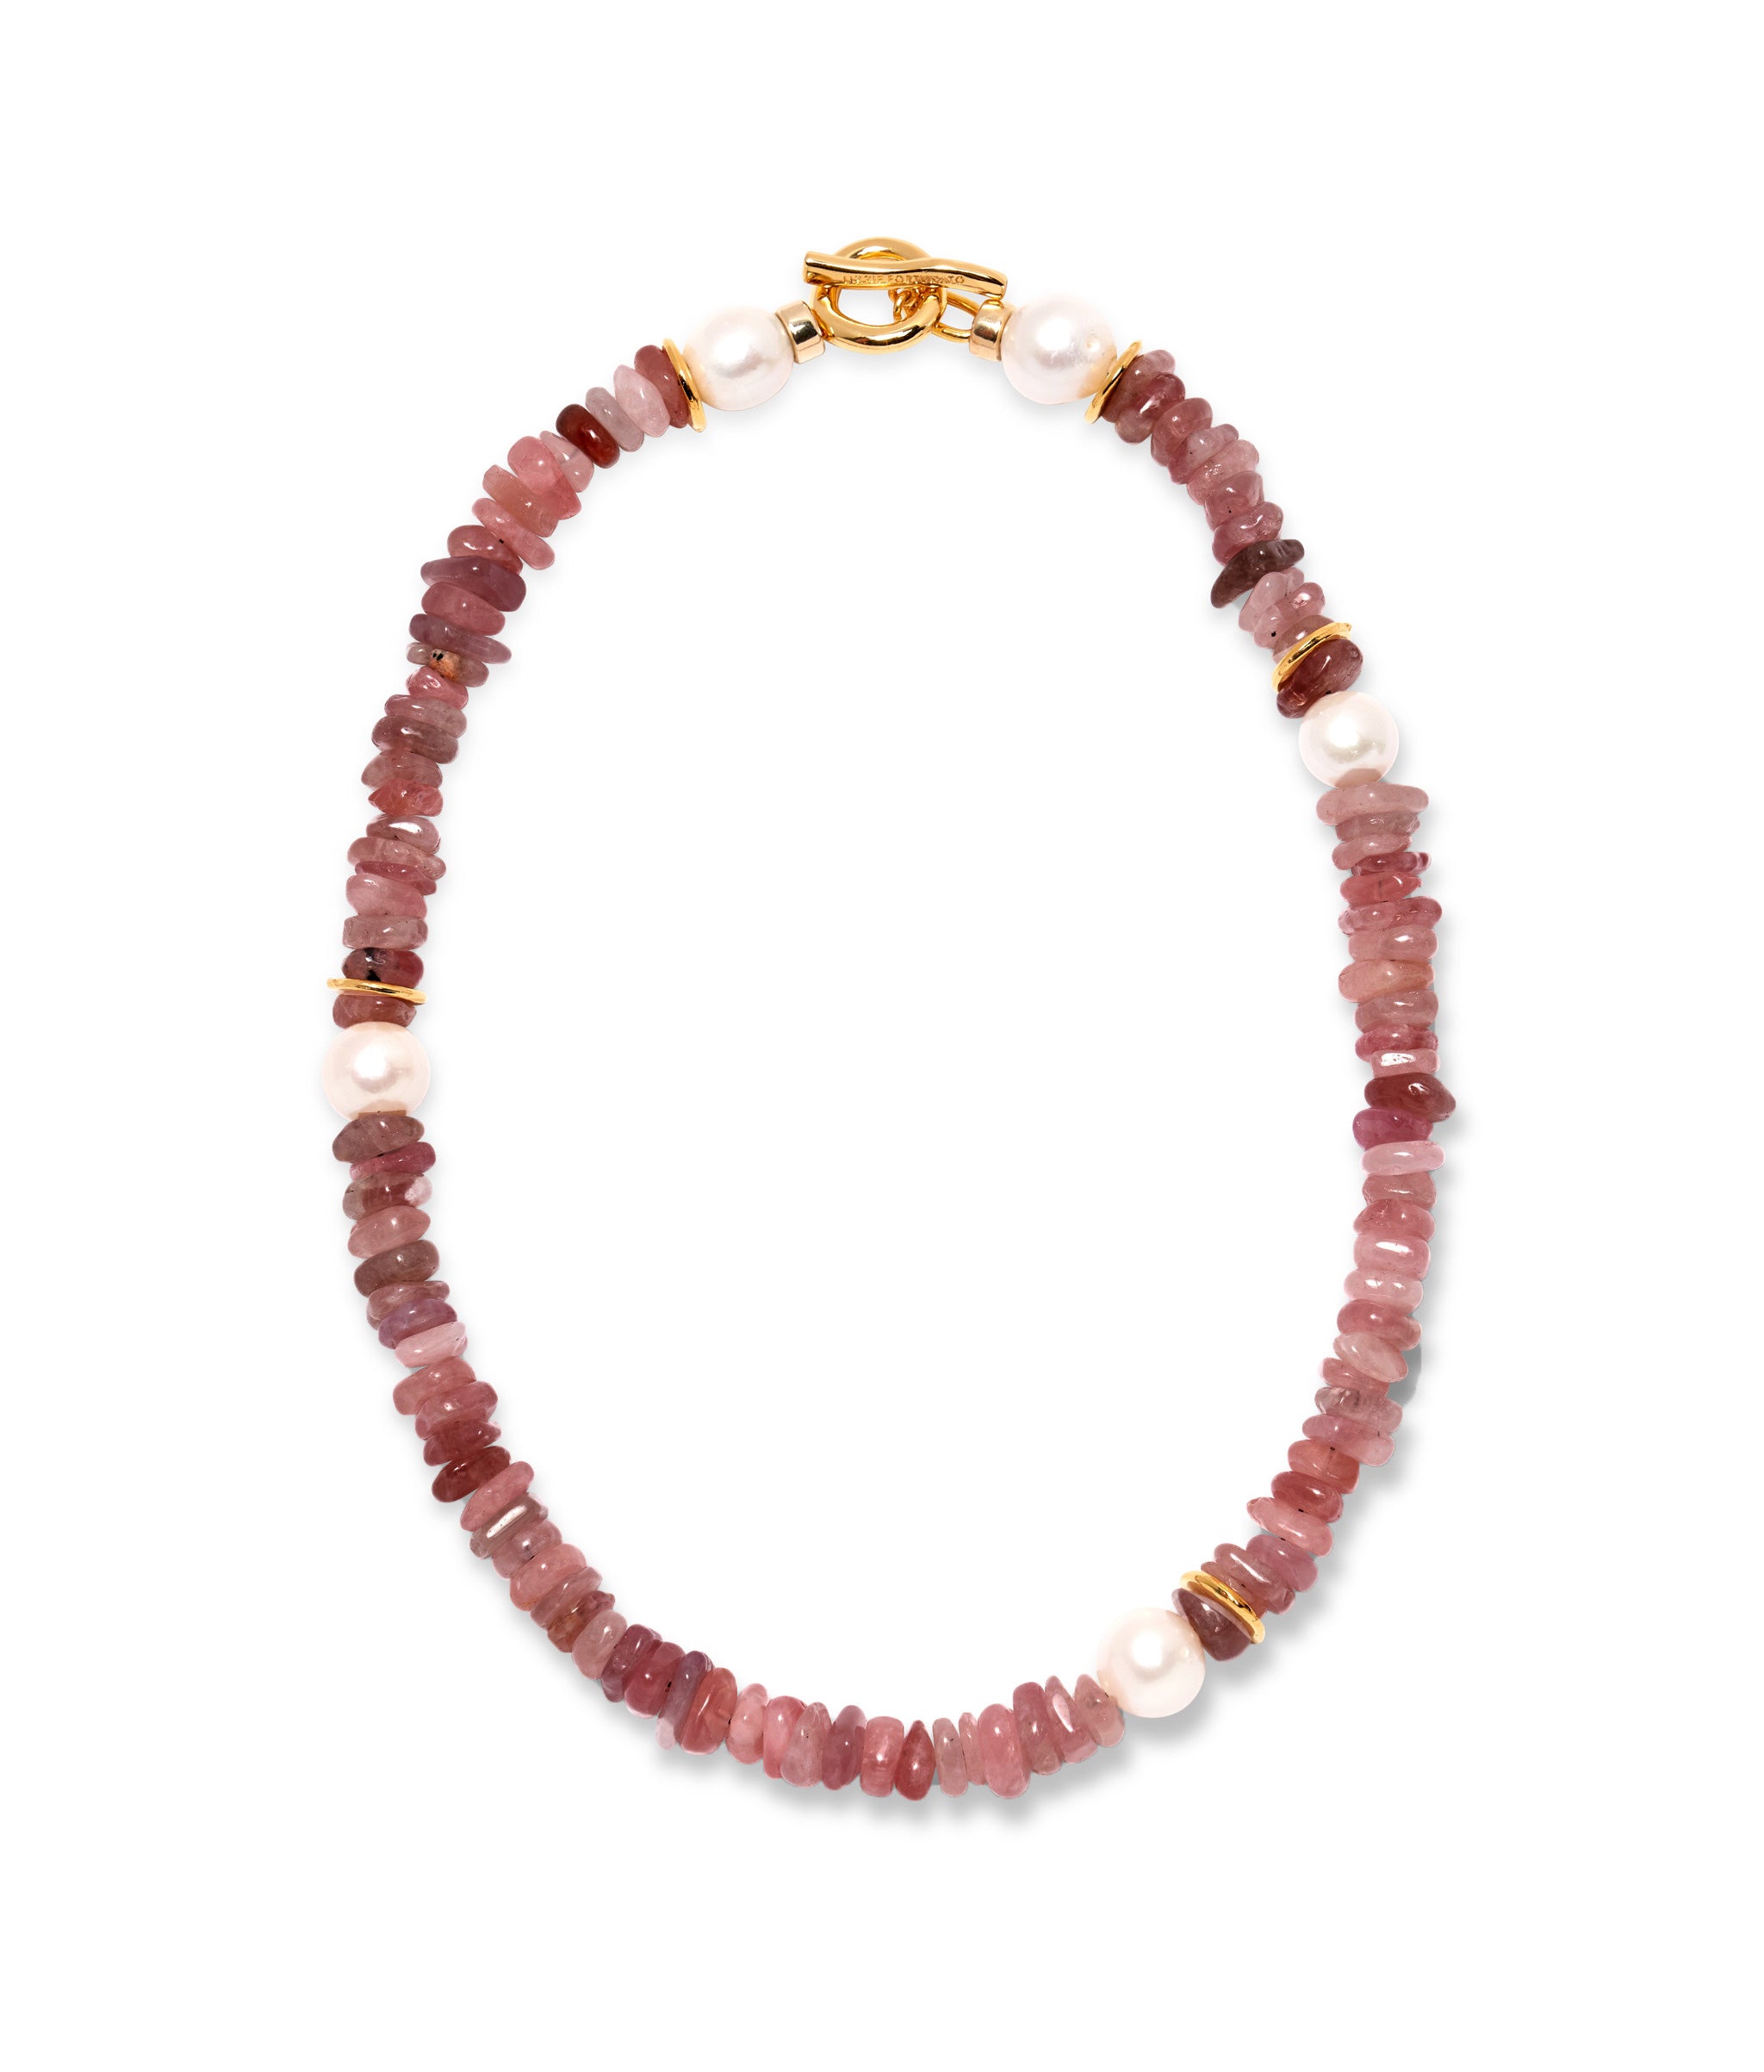 Mood Necklace in Strawberry Quartz. Strawberry Quartz necklace with assorted pearls, gold plated brass, toggle closure.